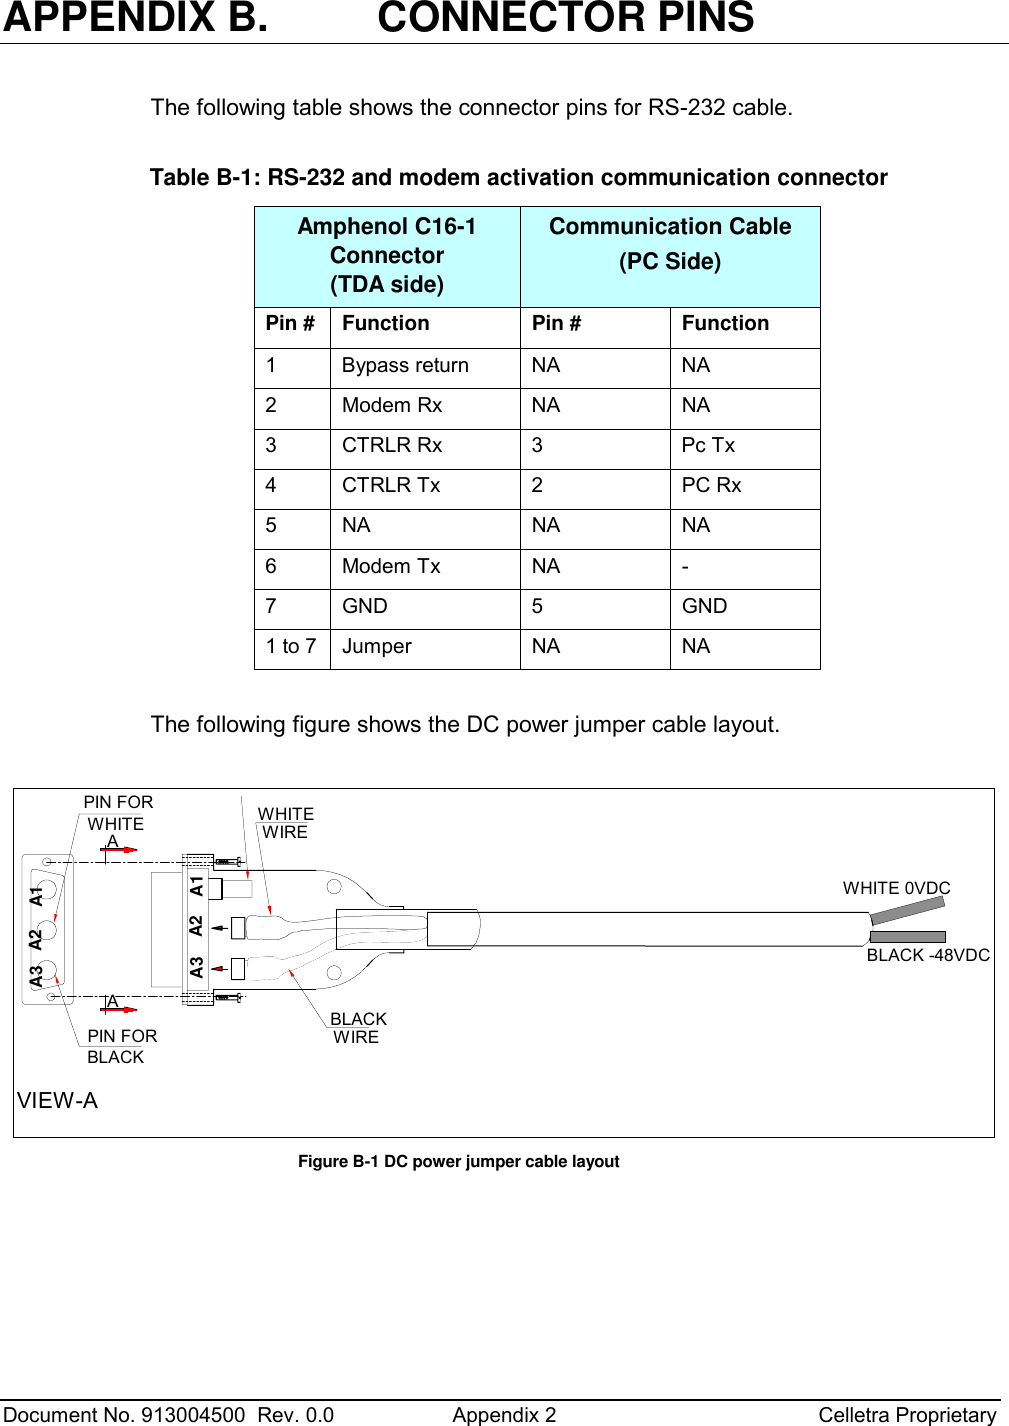  Document No. 913004500  Rev. 0.0  Appendix 2  Celletra Proprietary   APPENDIX B.    CONNECTOR PINS The following table shows the connector pins for RS-232 cable.  Table B-1: RS-232 and modem activation communication connector Amphenol C16-1 Connector  (TDA side) Communication Cable (PC Side) Pin #  Function  Pin #  Function 1 Bypass return NA  NA 2 Modem Rx  NA  NA 3  CTRLR Rx  3  Pc Tx 4  CTRLR Tx  2  PC Rx 5 NA  NA  NA 6 Modem Tx  NA  - 7 GND  5  GND 1 to 7  Jumper  NA  NA  The following figure shows the DC power jumper cable layout.  A1A3 A2BLACKWHITEWIREWIREAAPIN FORVIEW-AA3 A2 A1 BLACKPIN FORWHITEWHITE 0VDCBLACK -48VDC Figure B-1 DC power jumper cable layout   